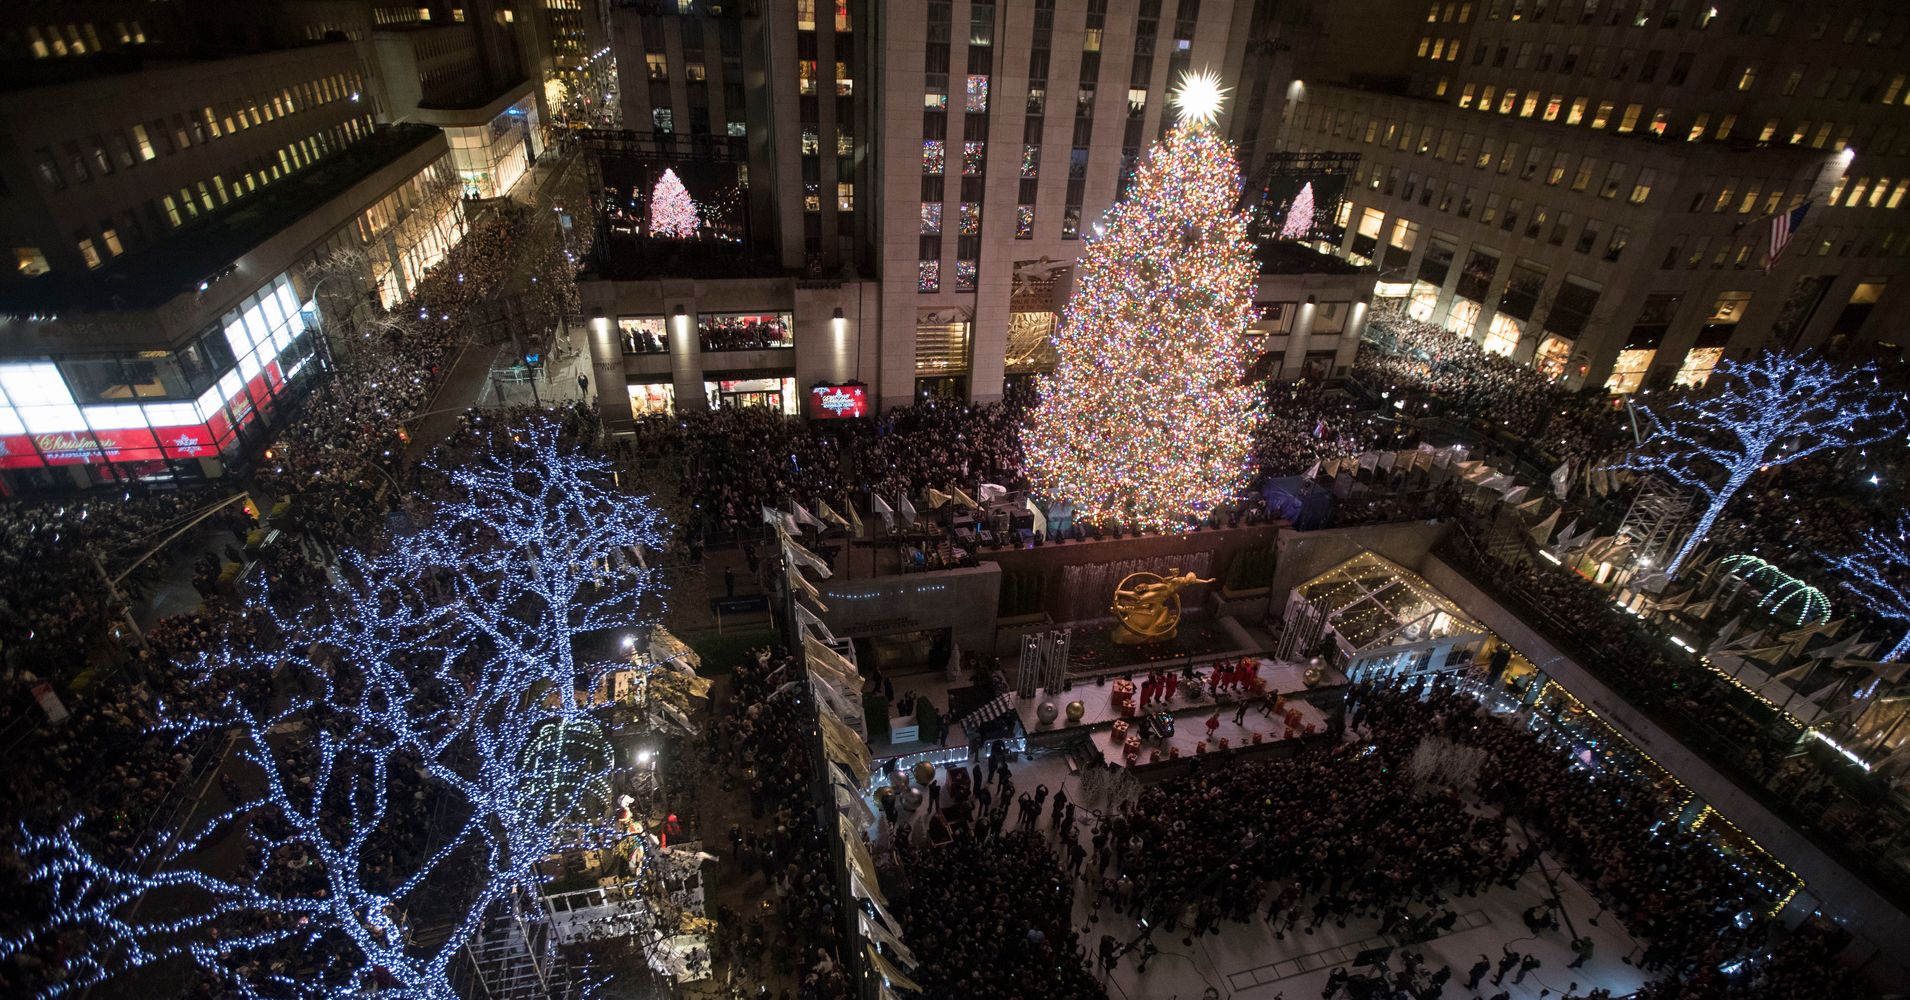 The Beautiful Story Of Shelby, This Year's Rockefeller Center Christmas Tree | HuffPost